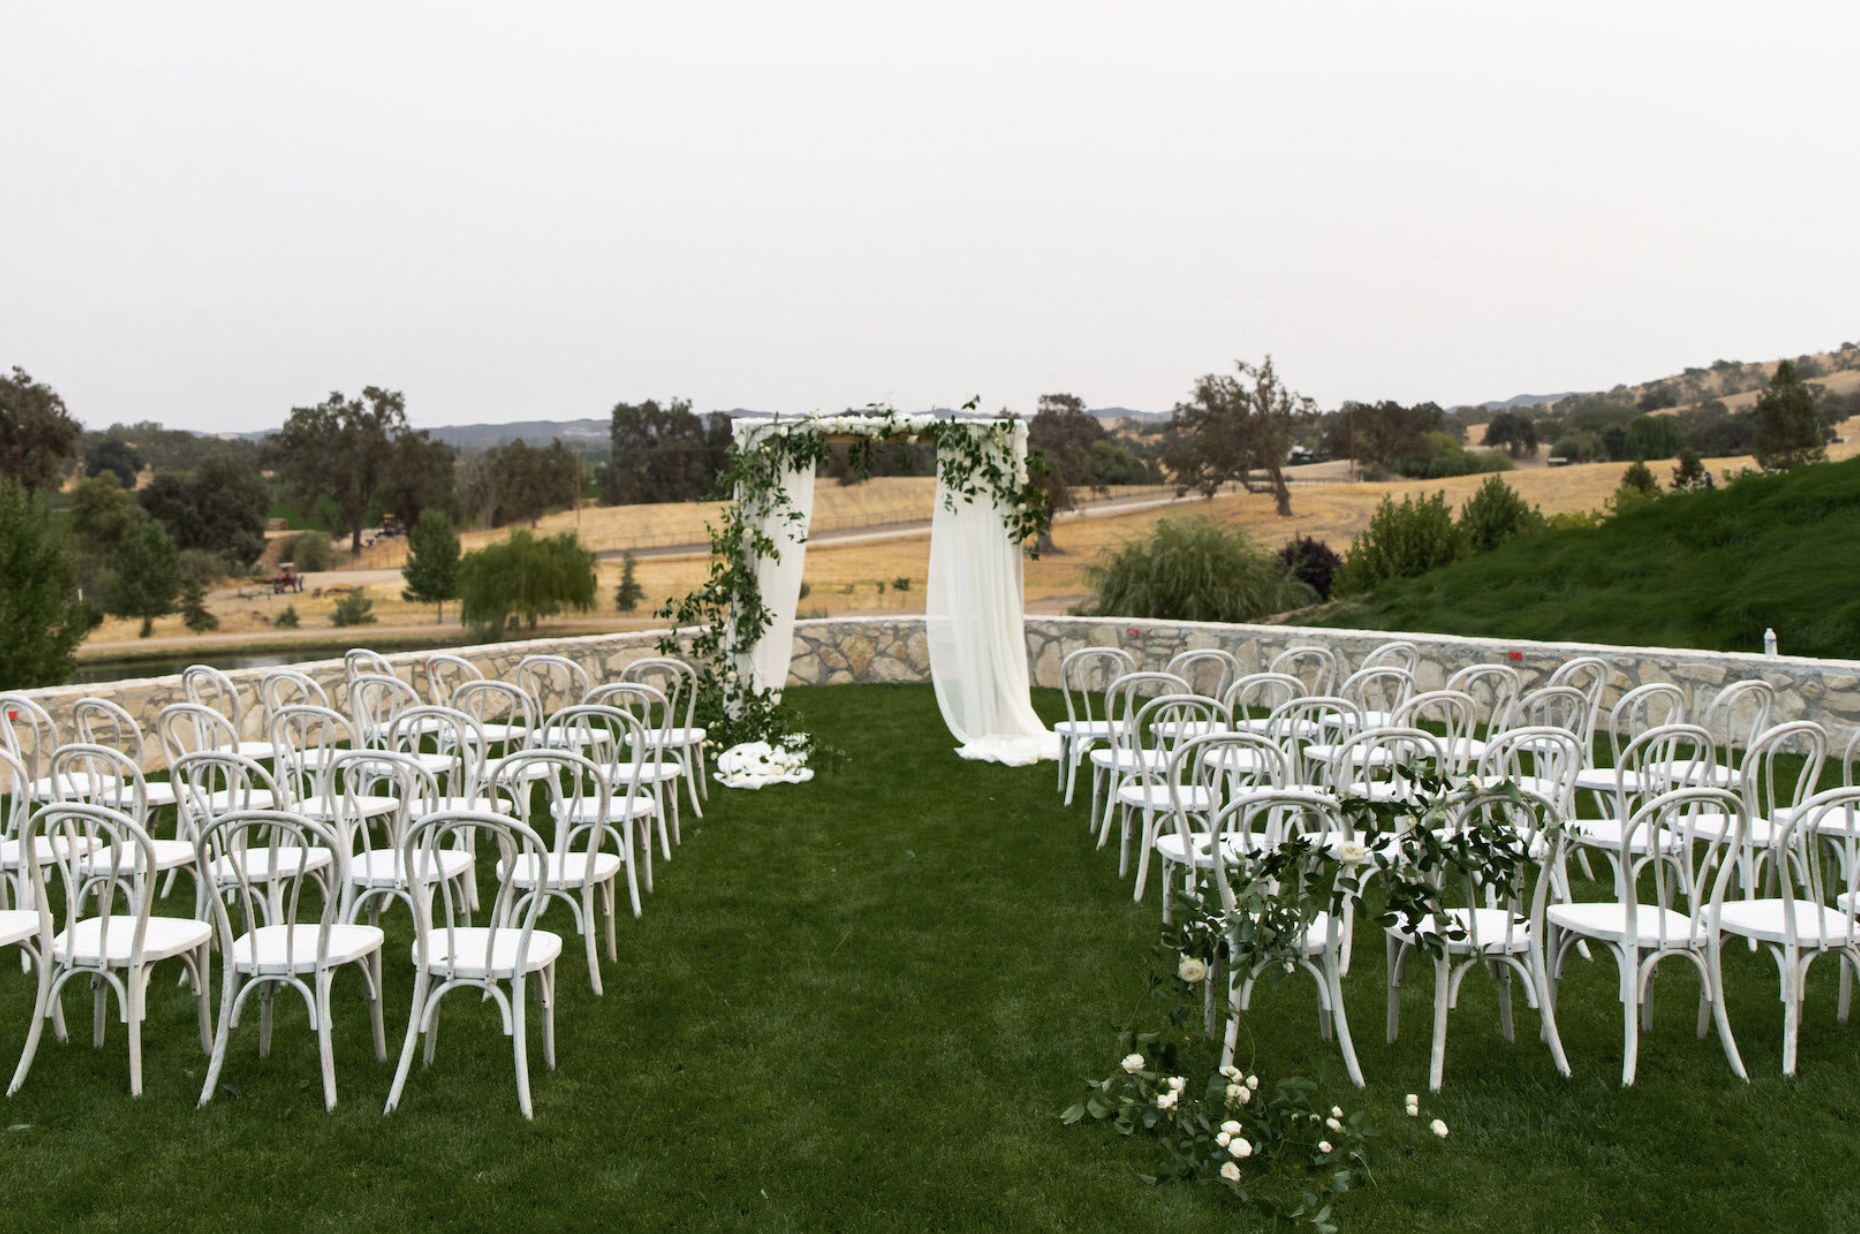 New Wedding Venues to Check Out in SLO County | Willow & Oak Estate